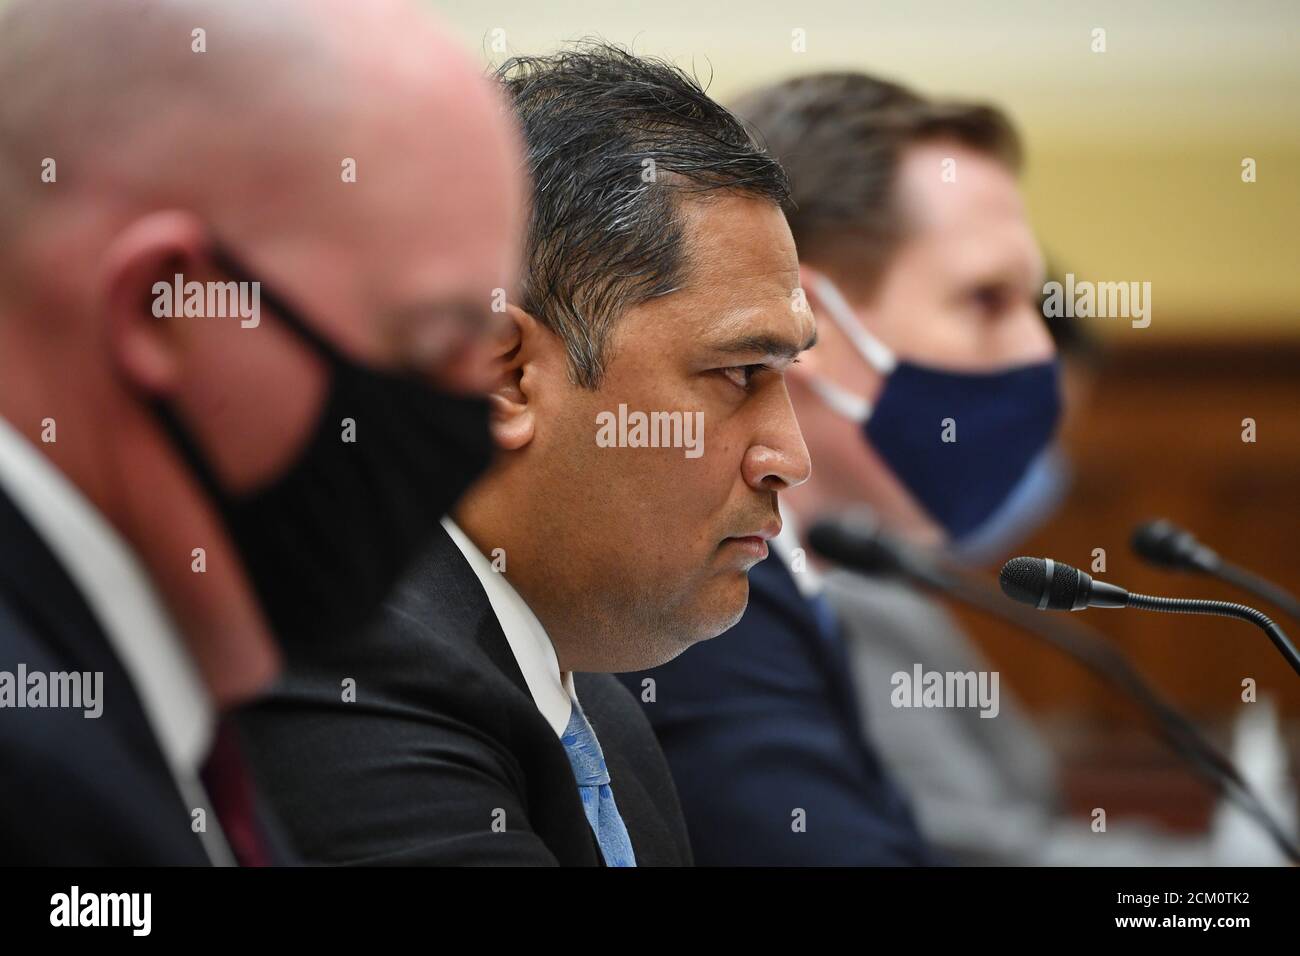 R. Clarke Cooper (L), Assistant Secretary of State for Political-Military Affairs, Brian Bulatao (C), Under Secretary of State for Management, and Marik String, Acting Legal Adviser for the State Department, testify before a House Committee on Foreign Affairs hearing looking into the firing of State Department Inspector General Steven Linick, on Capitol Hill in Washington, DC on Wednesday, September 16, 2020. Credit: Kevin Dietsch/Pool via CNP | usage worldwide Stock Photo